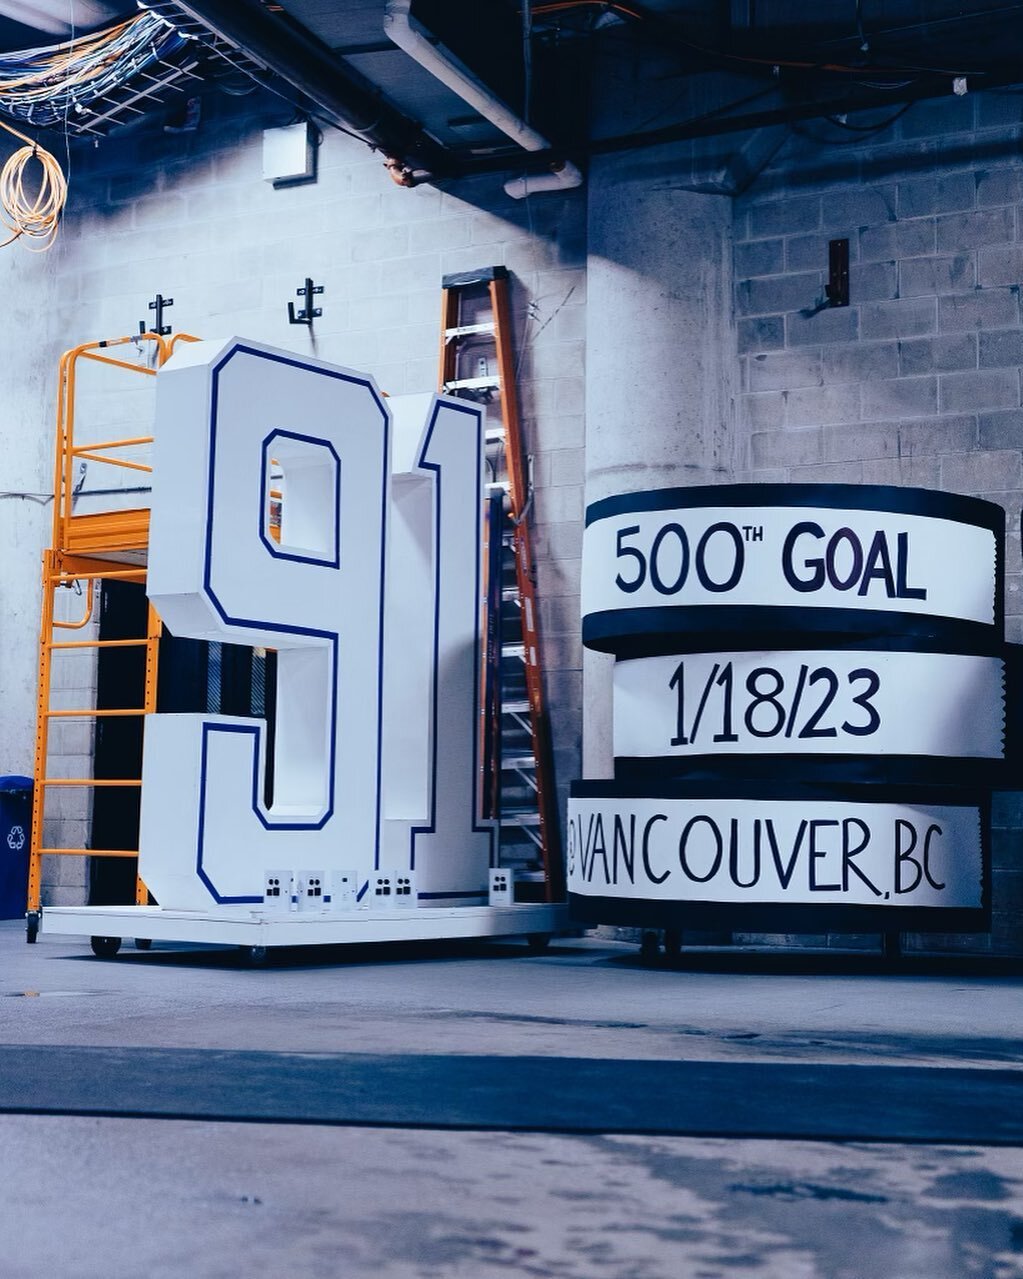 In honor of the playoffs, taking us back to our Captain&rsquo;s 500 goal milestone 🙌 GO BOLTS ⚡️
&mdash;&mdash;&mdash;
@tblightning @amaliearena 
&mdash;&mdash;&mdash;
#oroeventco #gobolts #nhl #tblightning #tampa #eventdesign #stammer #stamkos